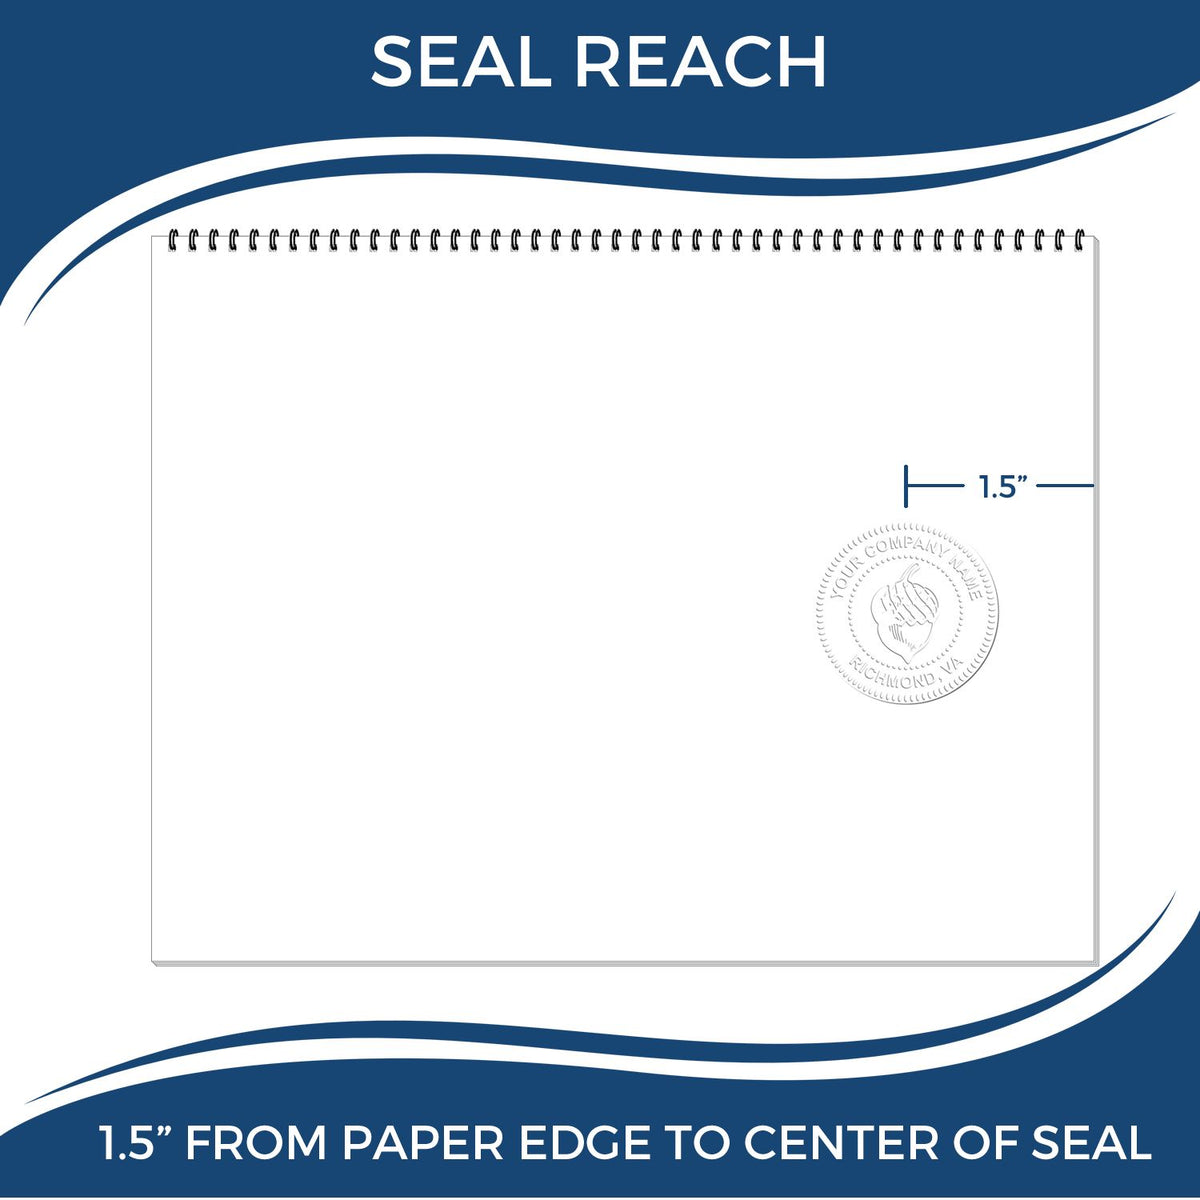 An infographic showing the seal reach which is represented by a ruler and a miniature seal image of the Gift Hawaii Landscape Architect Seal